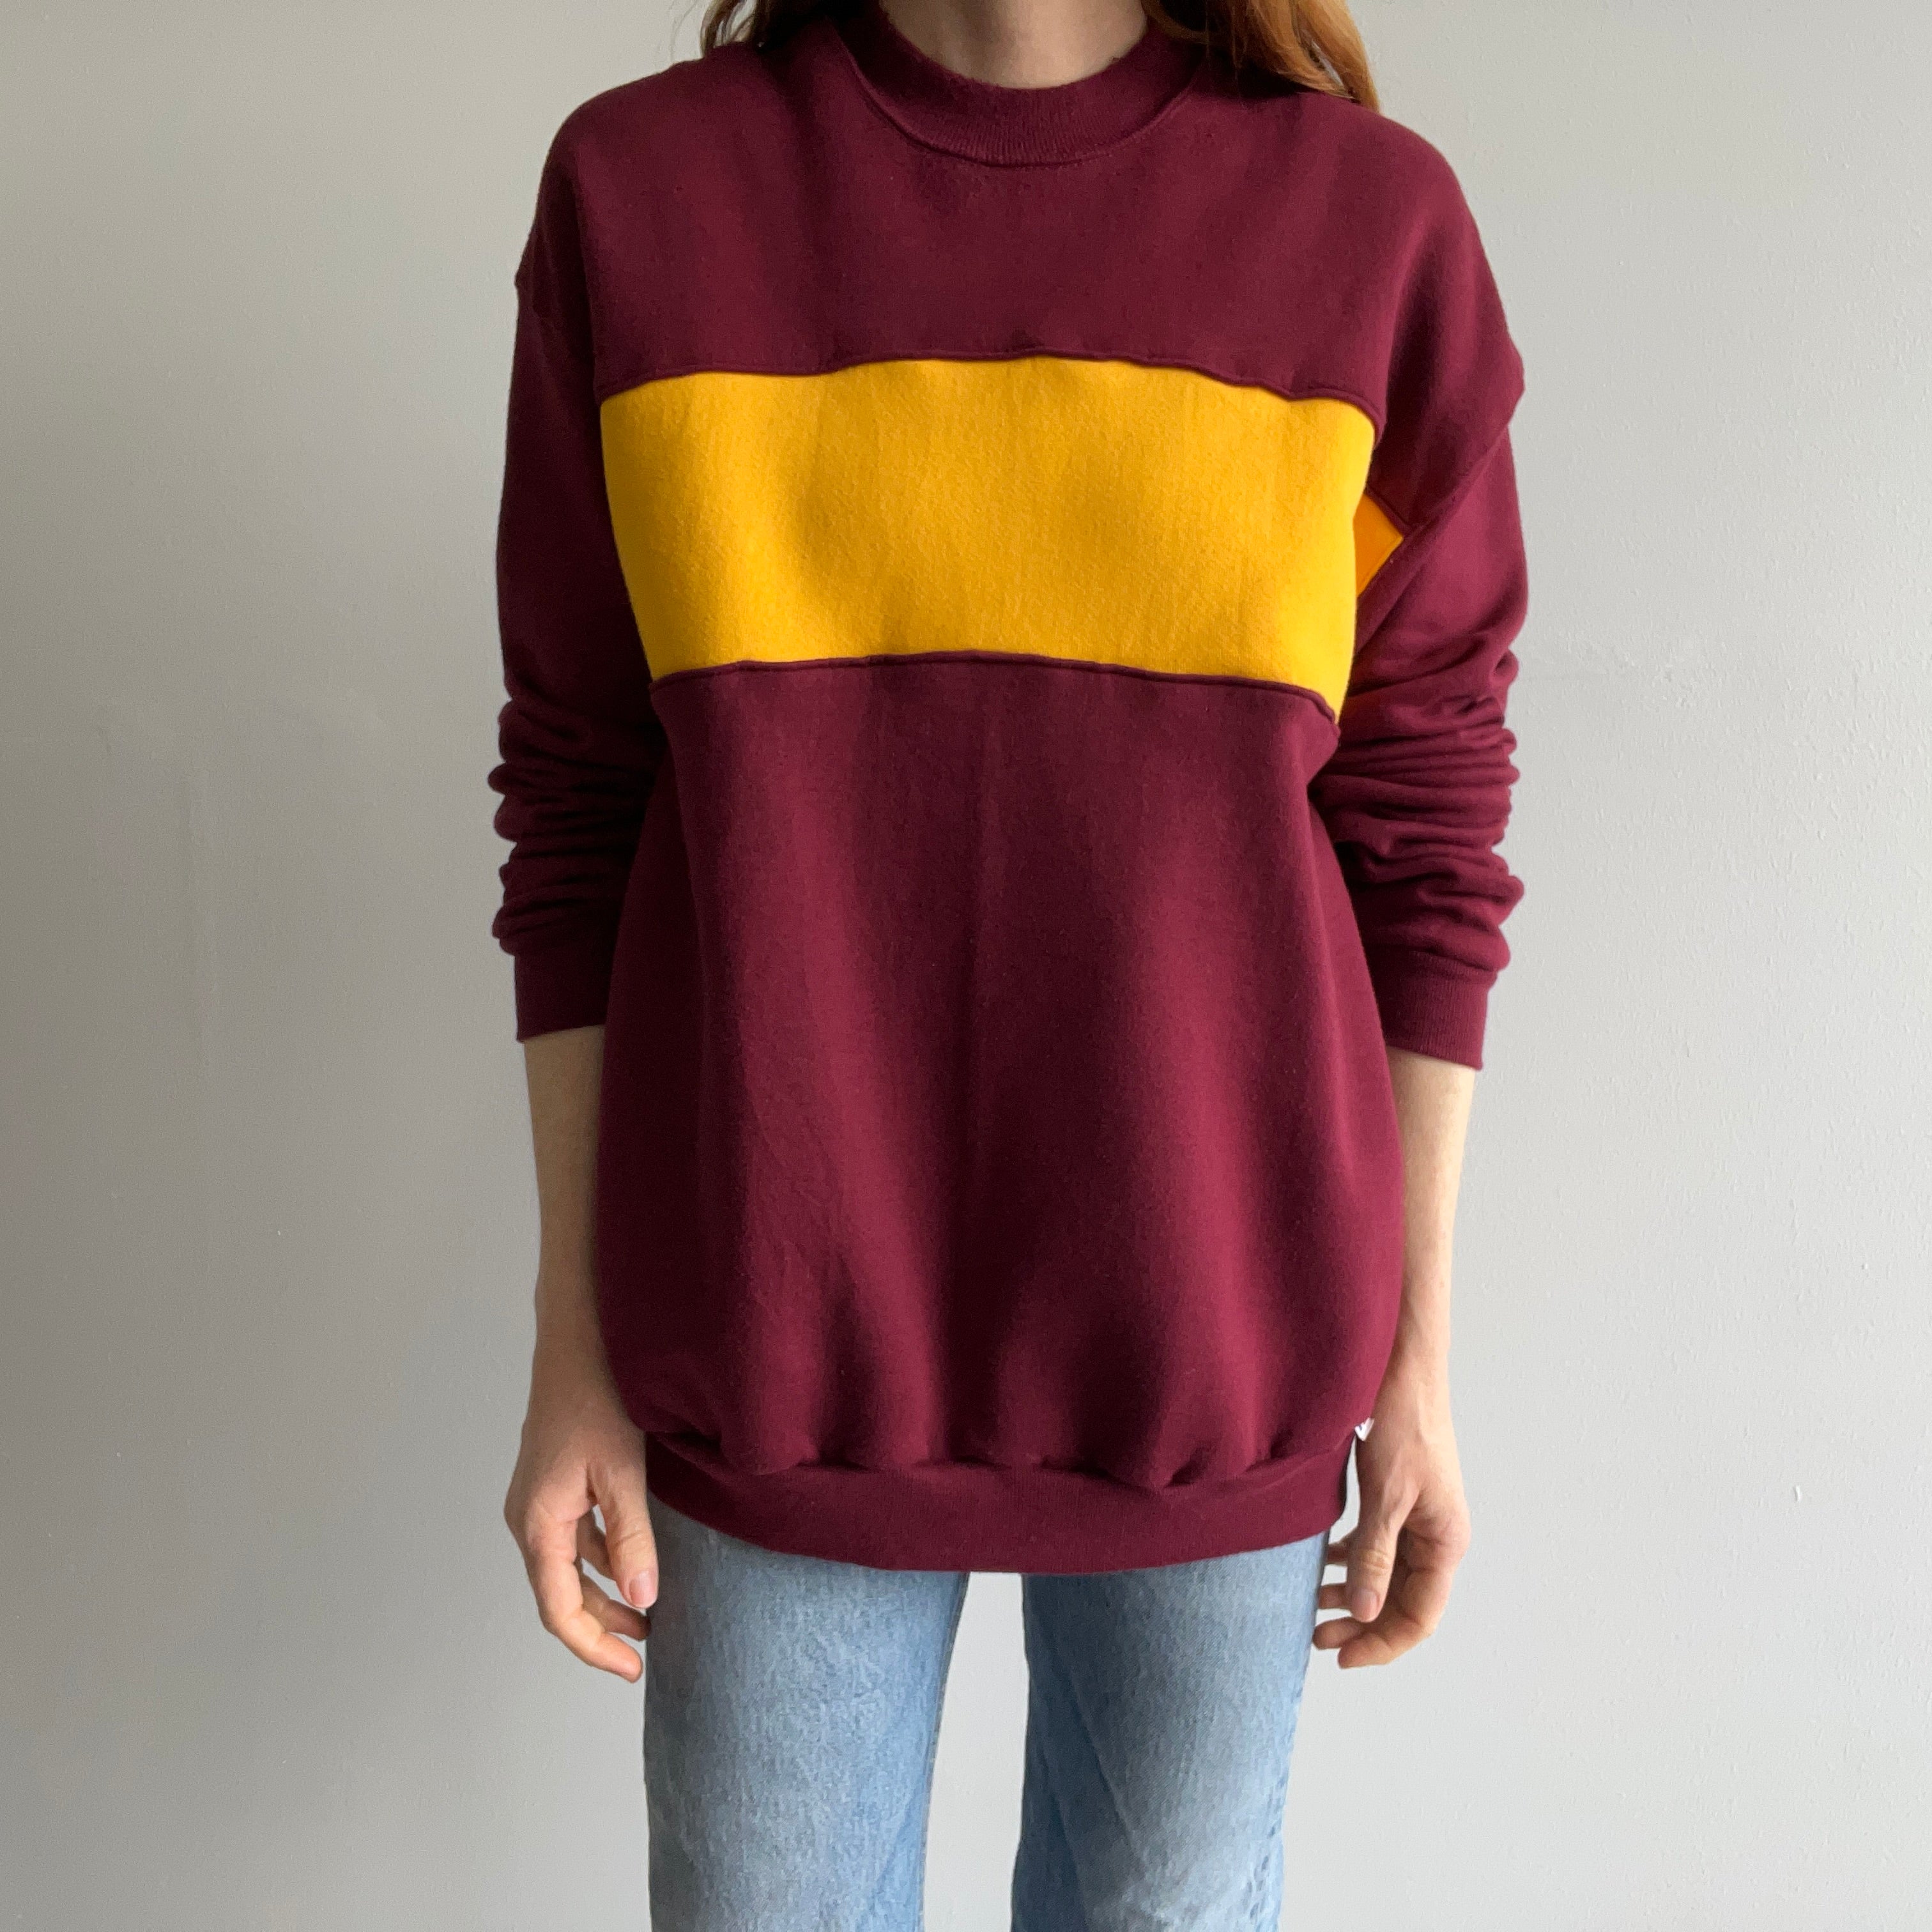 1980s Barely Worn Super Cozy Color Block Sweatshirt by Russell